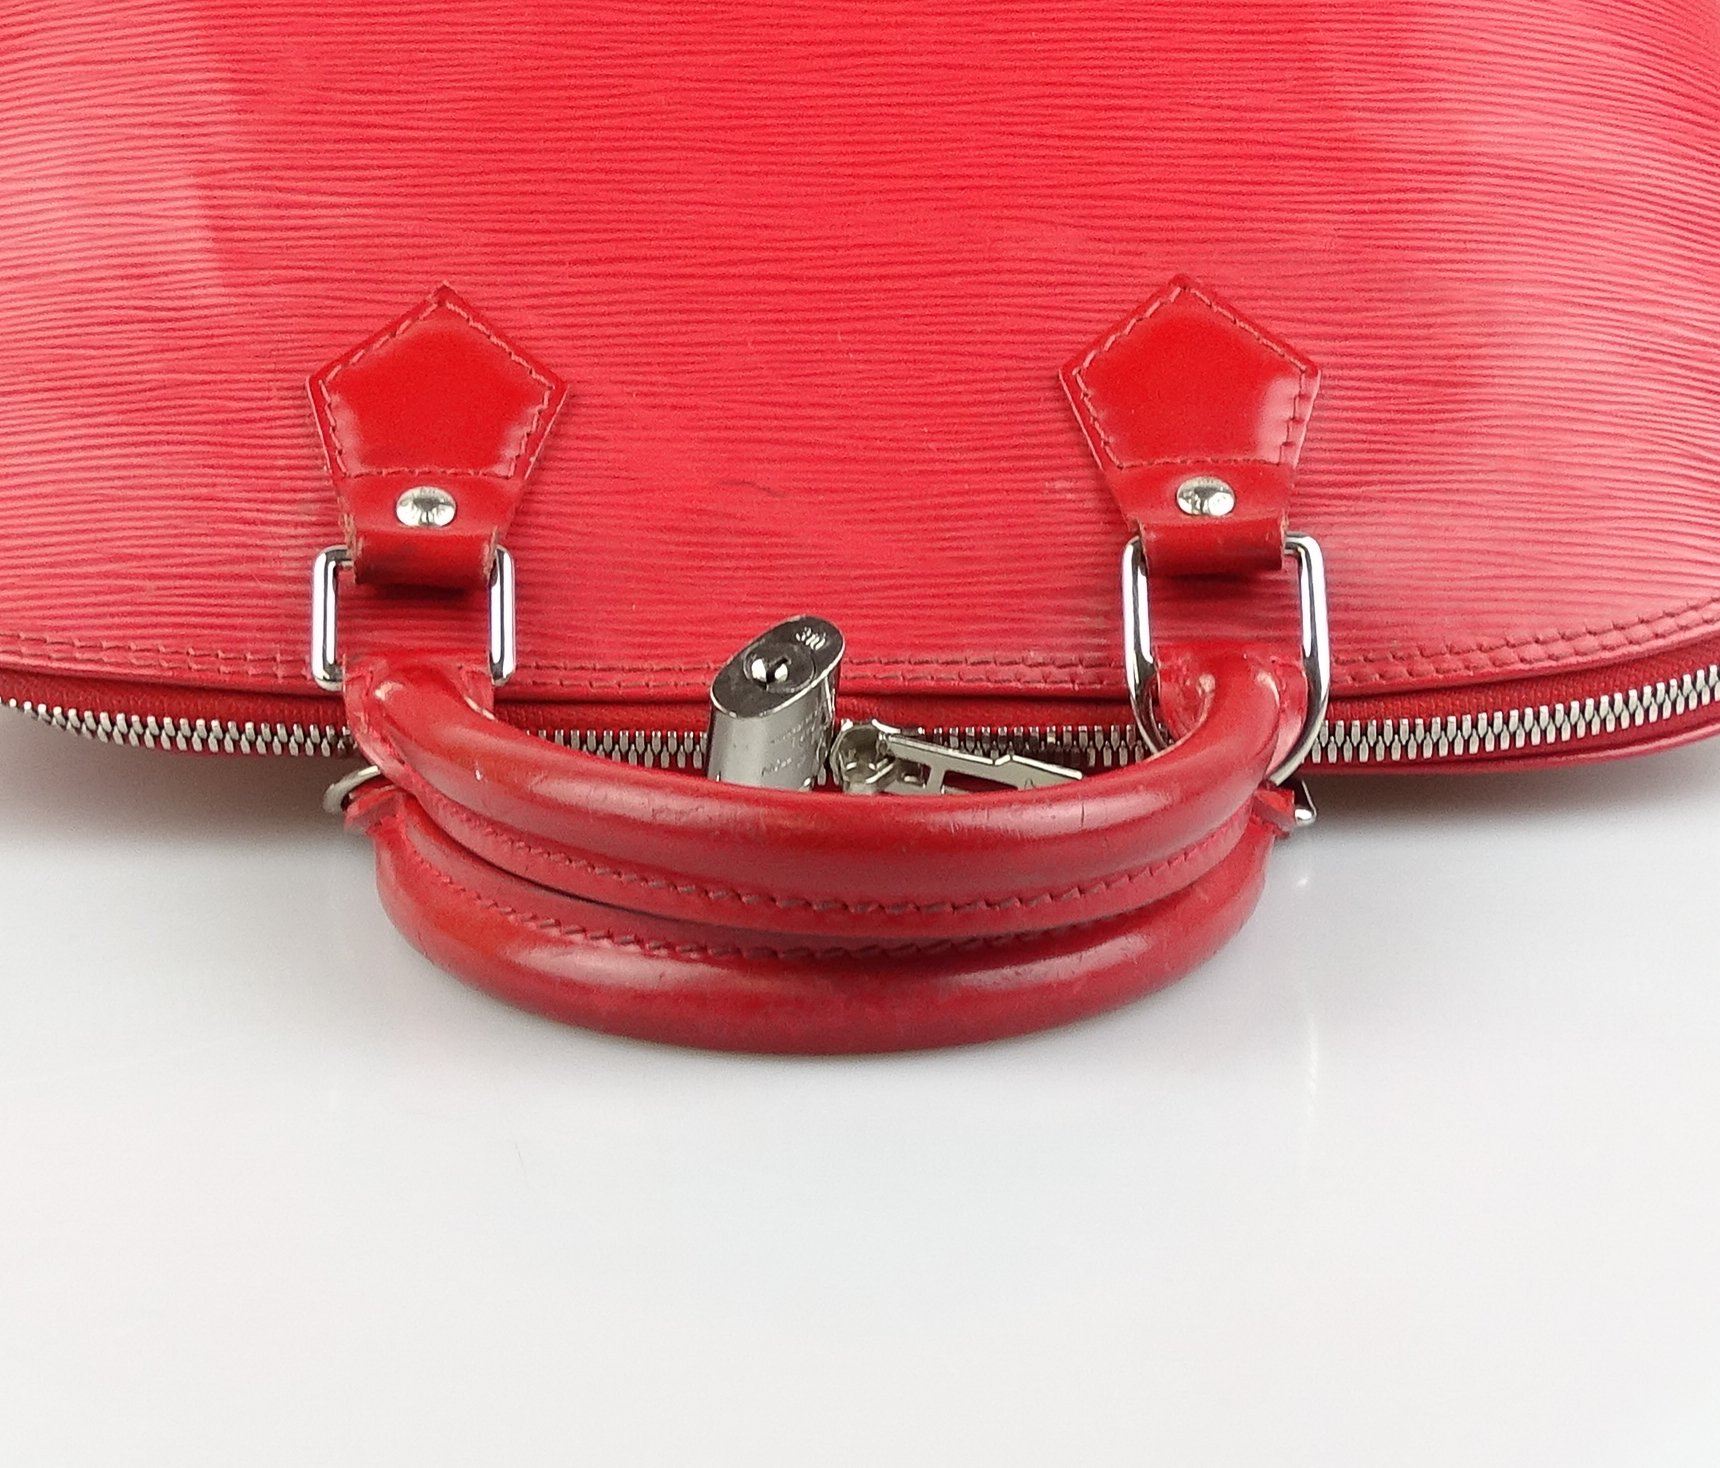 Louis Vuitton Alma BB in Epi Leather Rouge Coquelicot